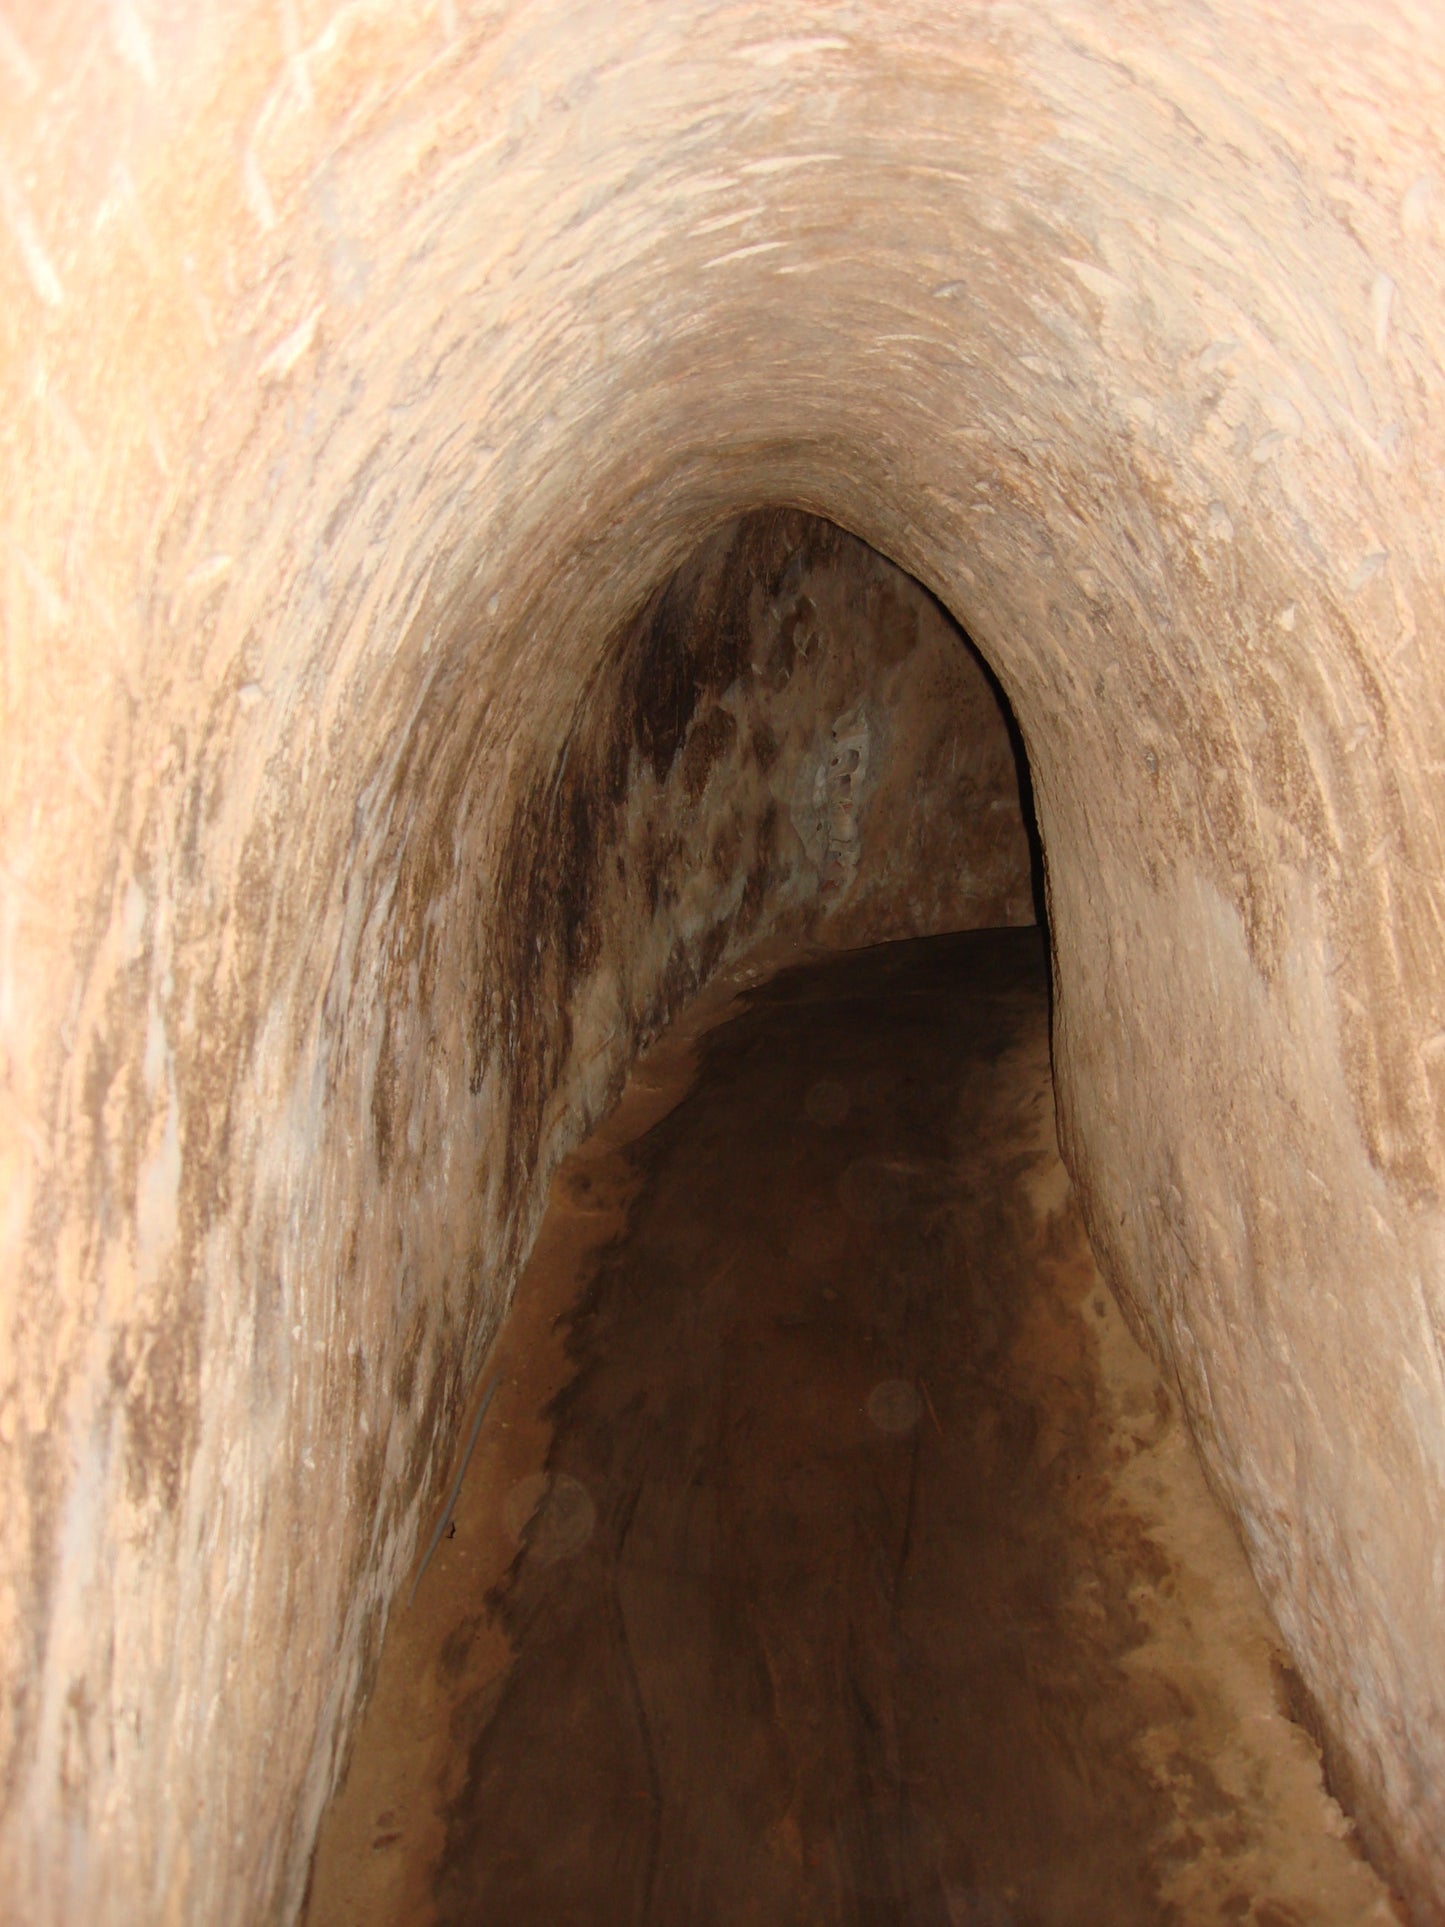 76B: (2 Days) Cu Chi Tunnels, Mekong Delta, Boat Tour, Red Brick Pottery Village